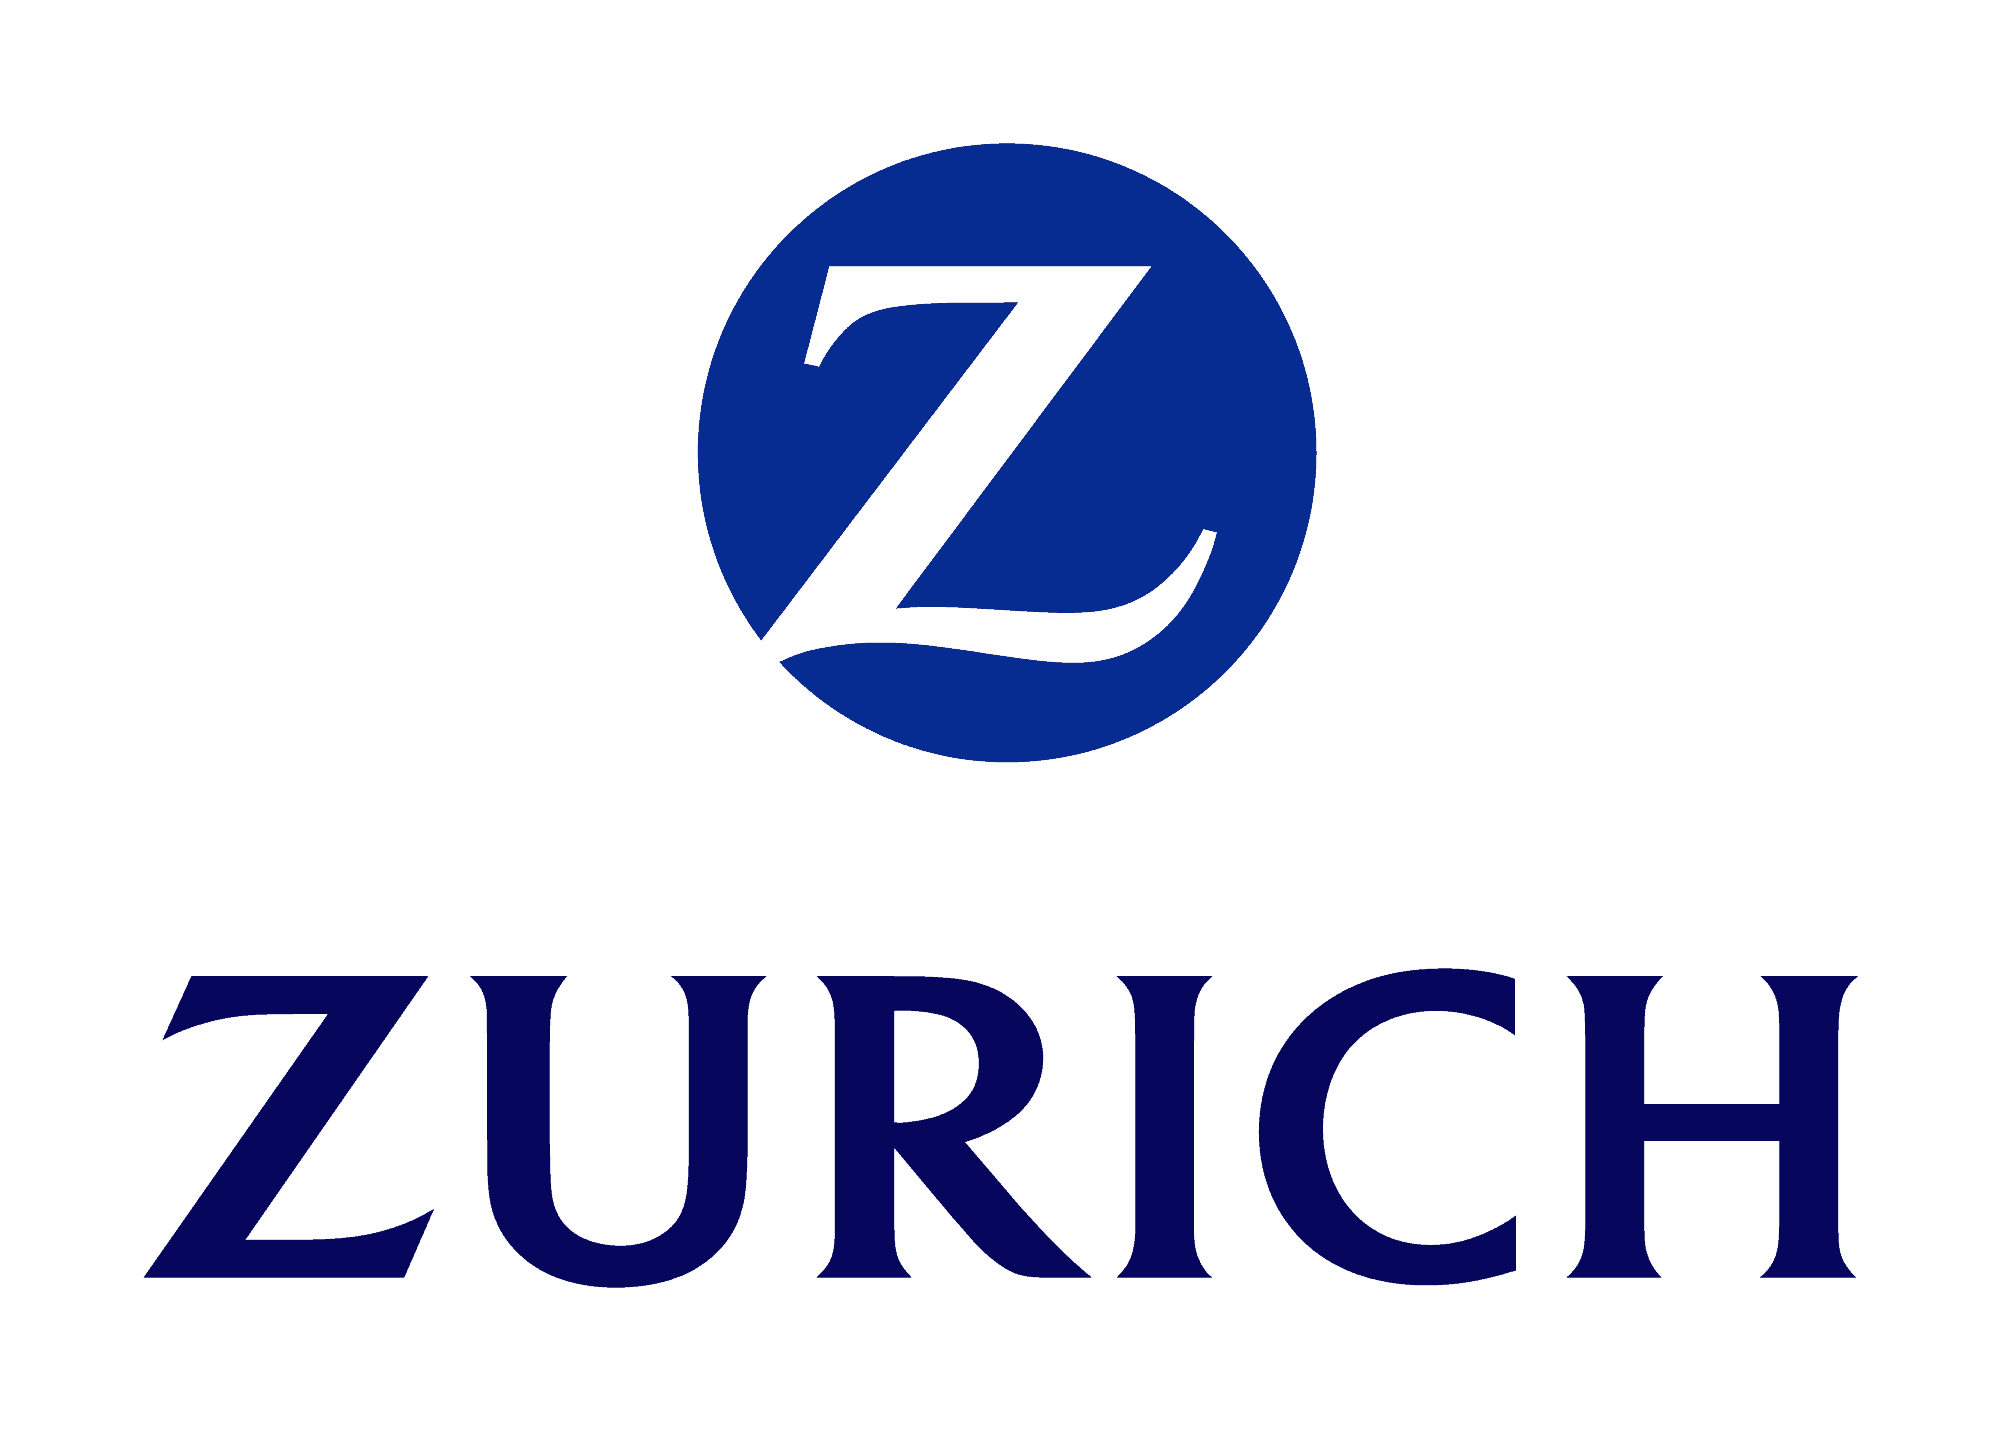 A blue logo with the word Zurich on it for technology startups or business coach.